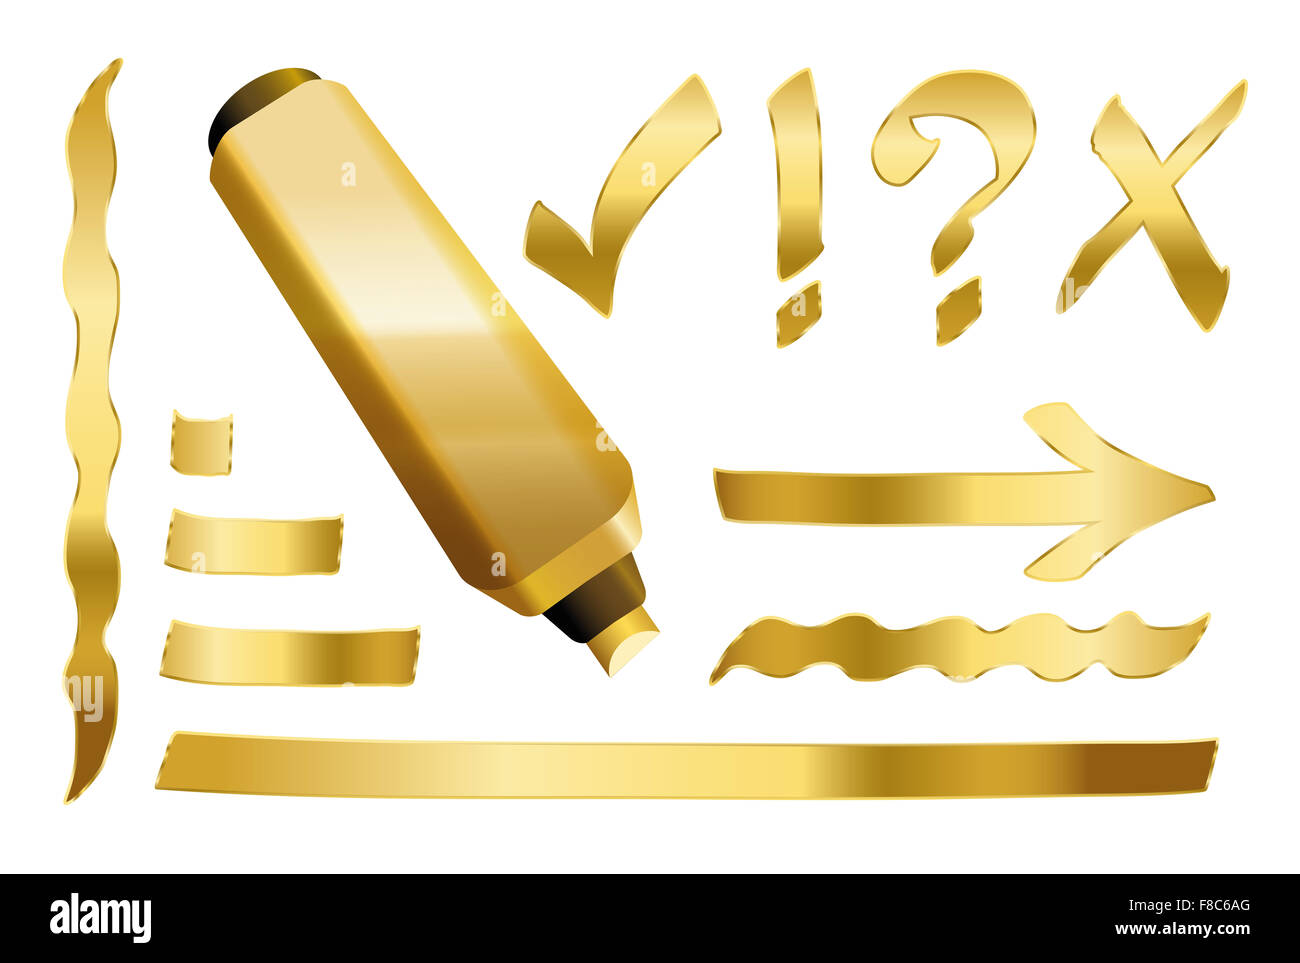 Gold marker - plus some gilded signs like call sign, question mark, tick mark, arrow and underlining. Stock Photo